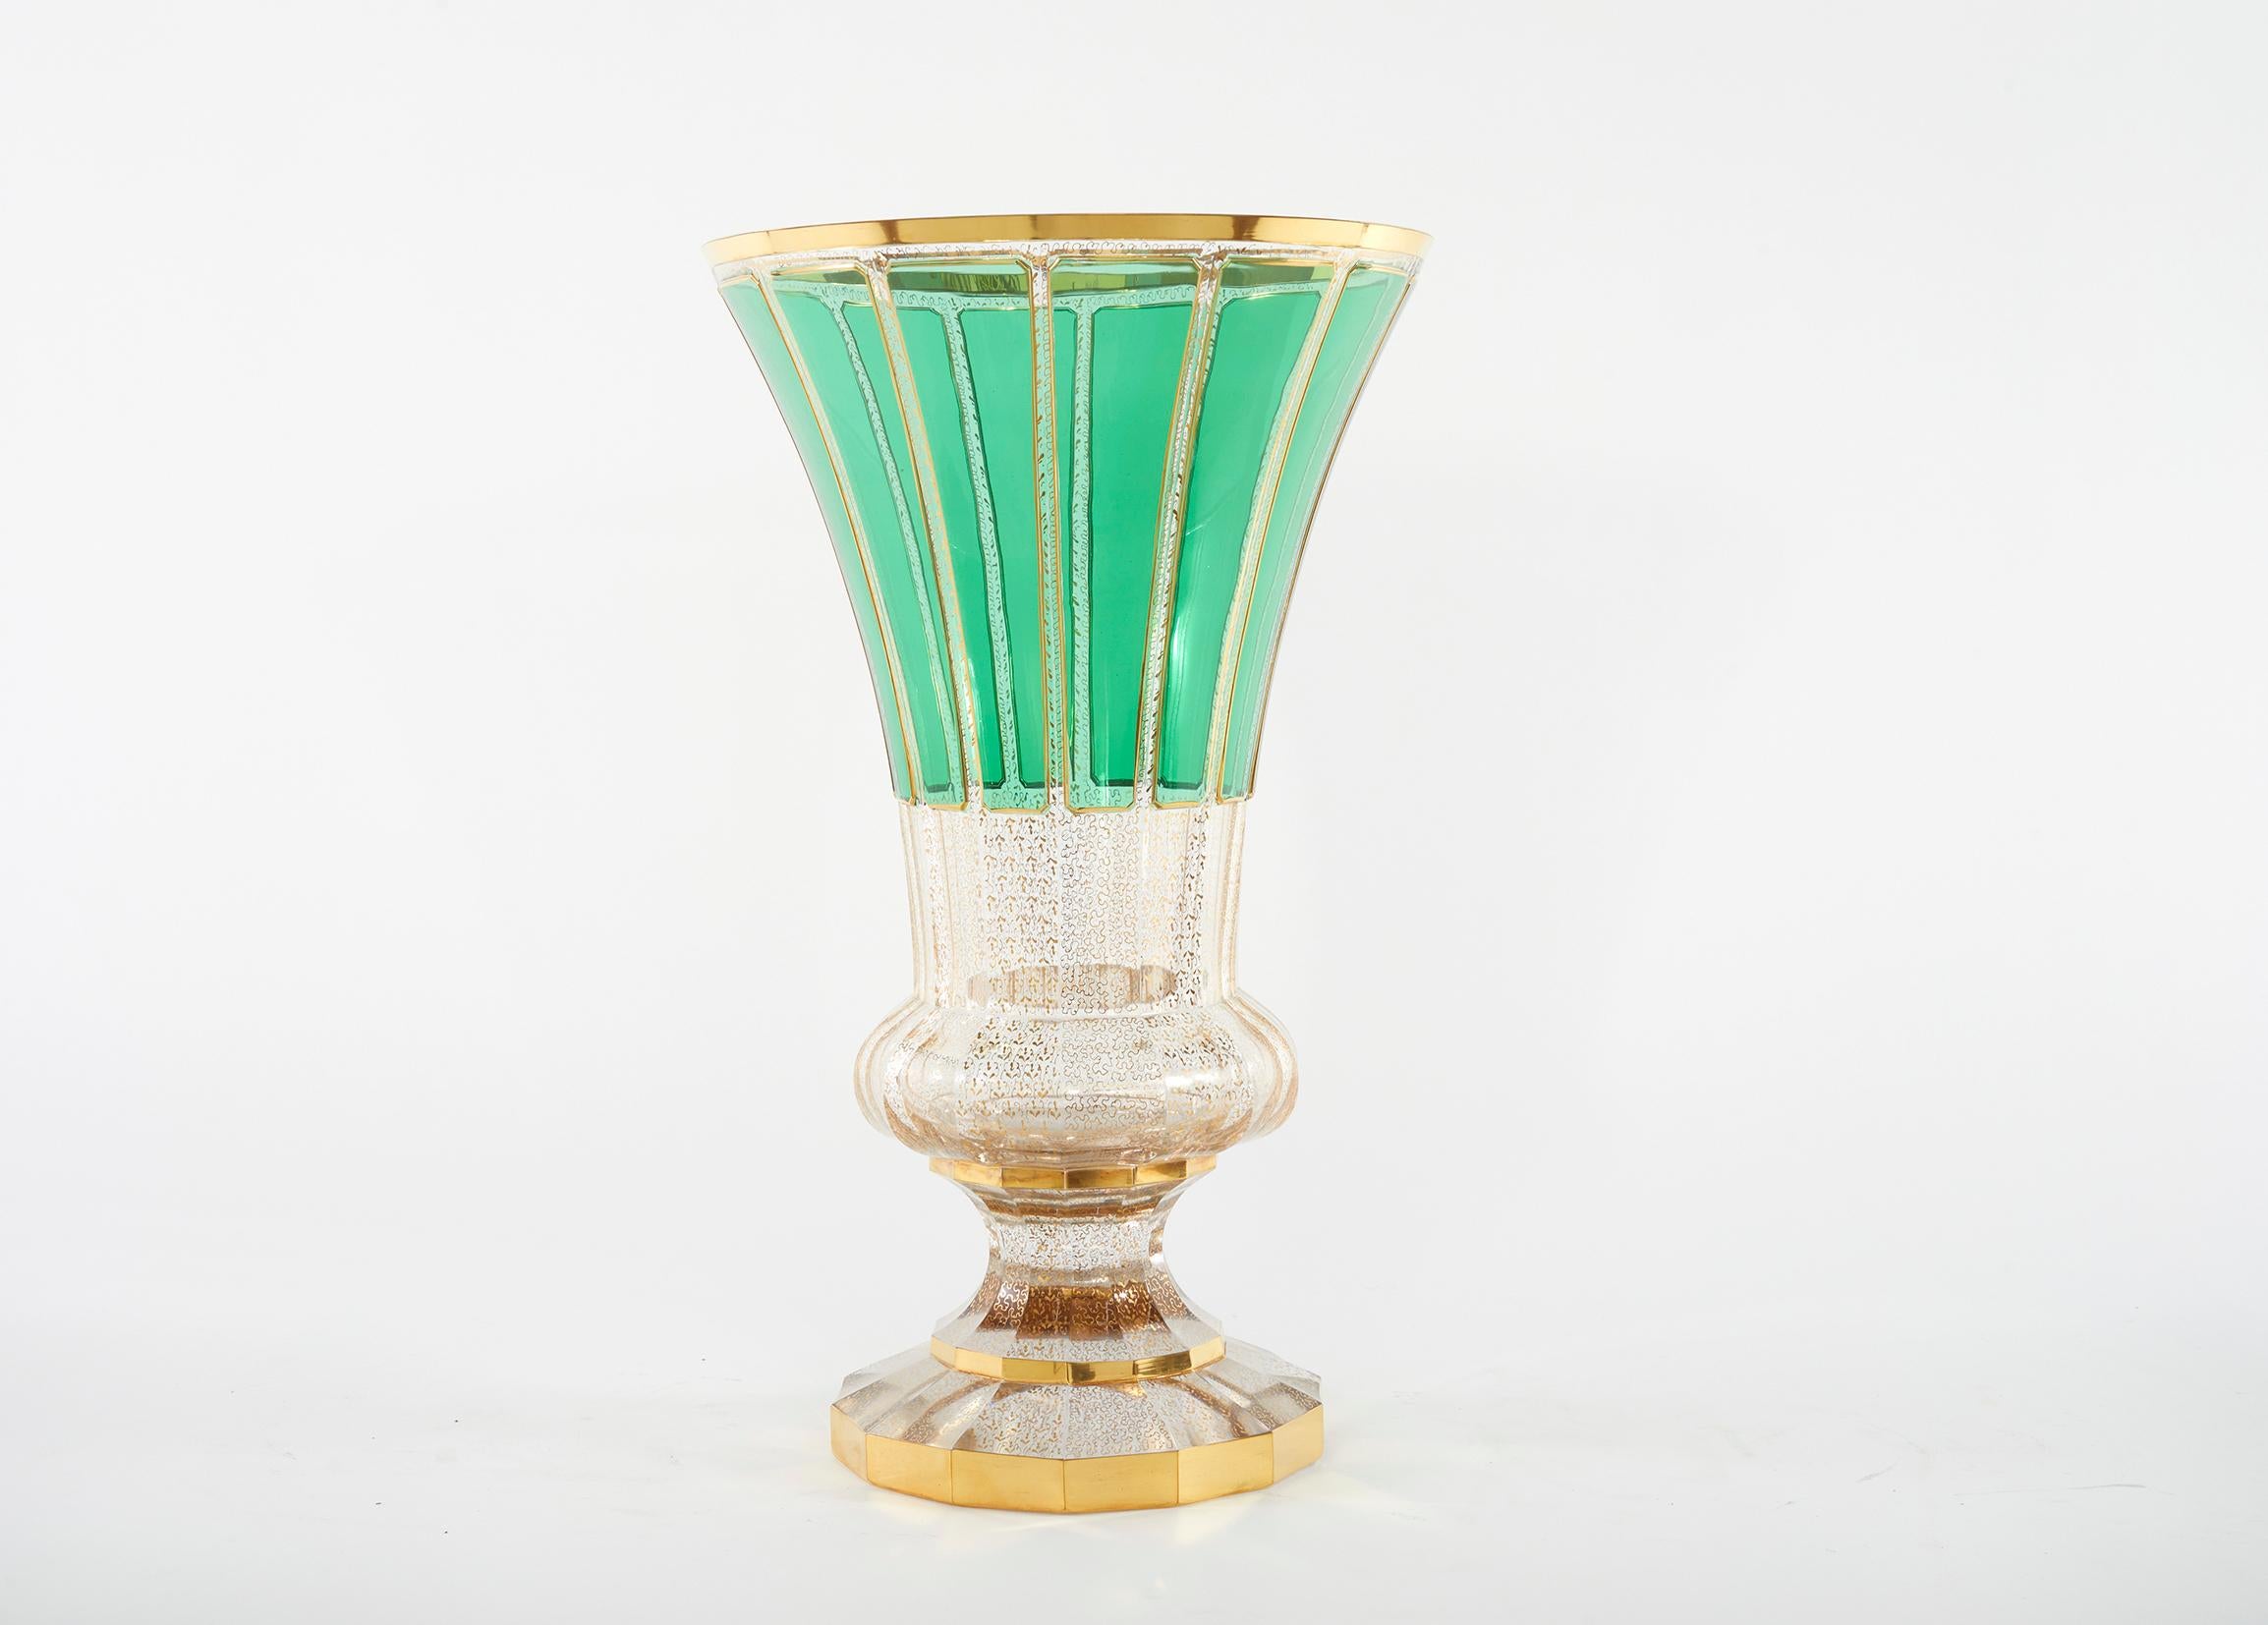 Very large and beautiful Moser Enameled green paneled with gilt gold design details decorative vase / piece. The vase is in great condition. Minor shelve wear underneath. No flaws observed, the decoration is bright & intact. The piece stand about